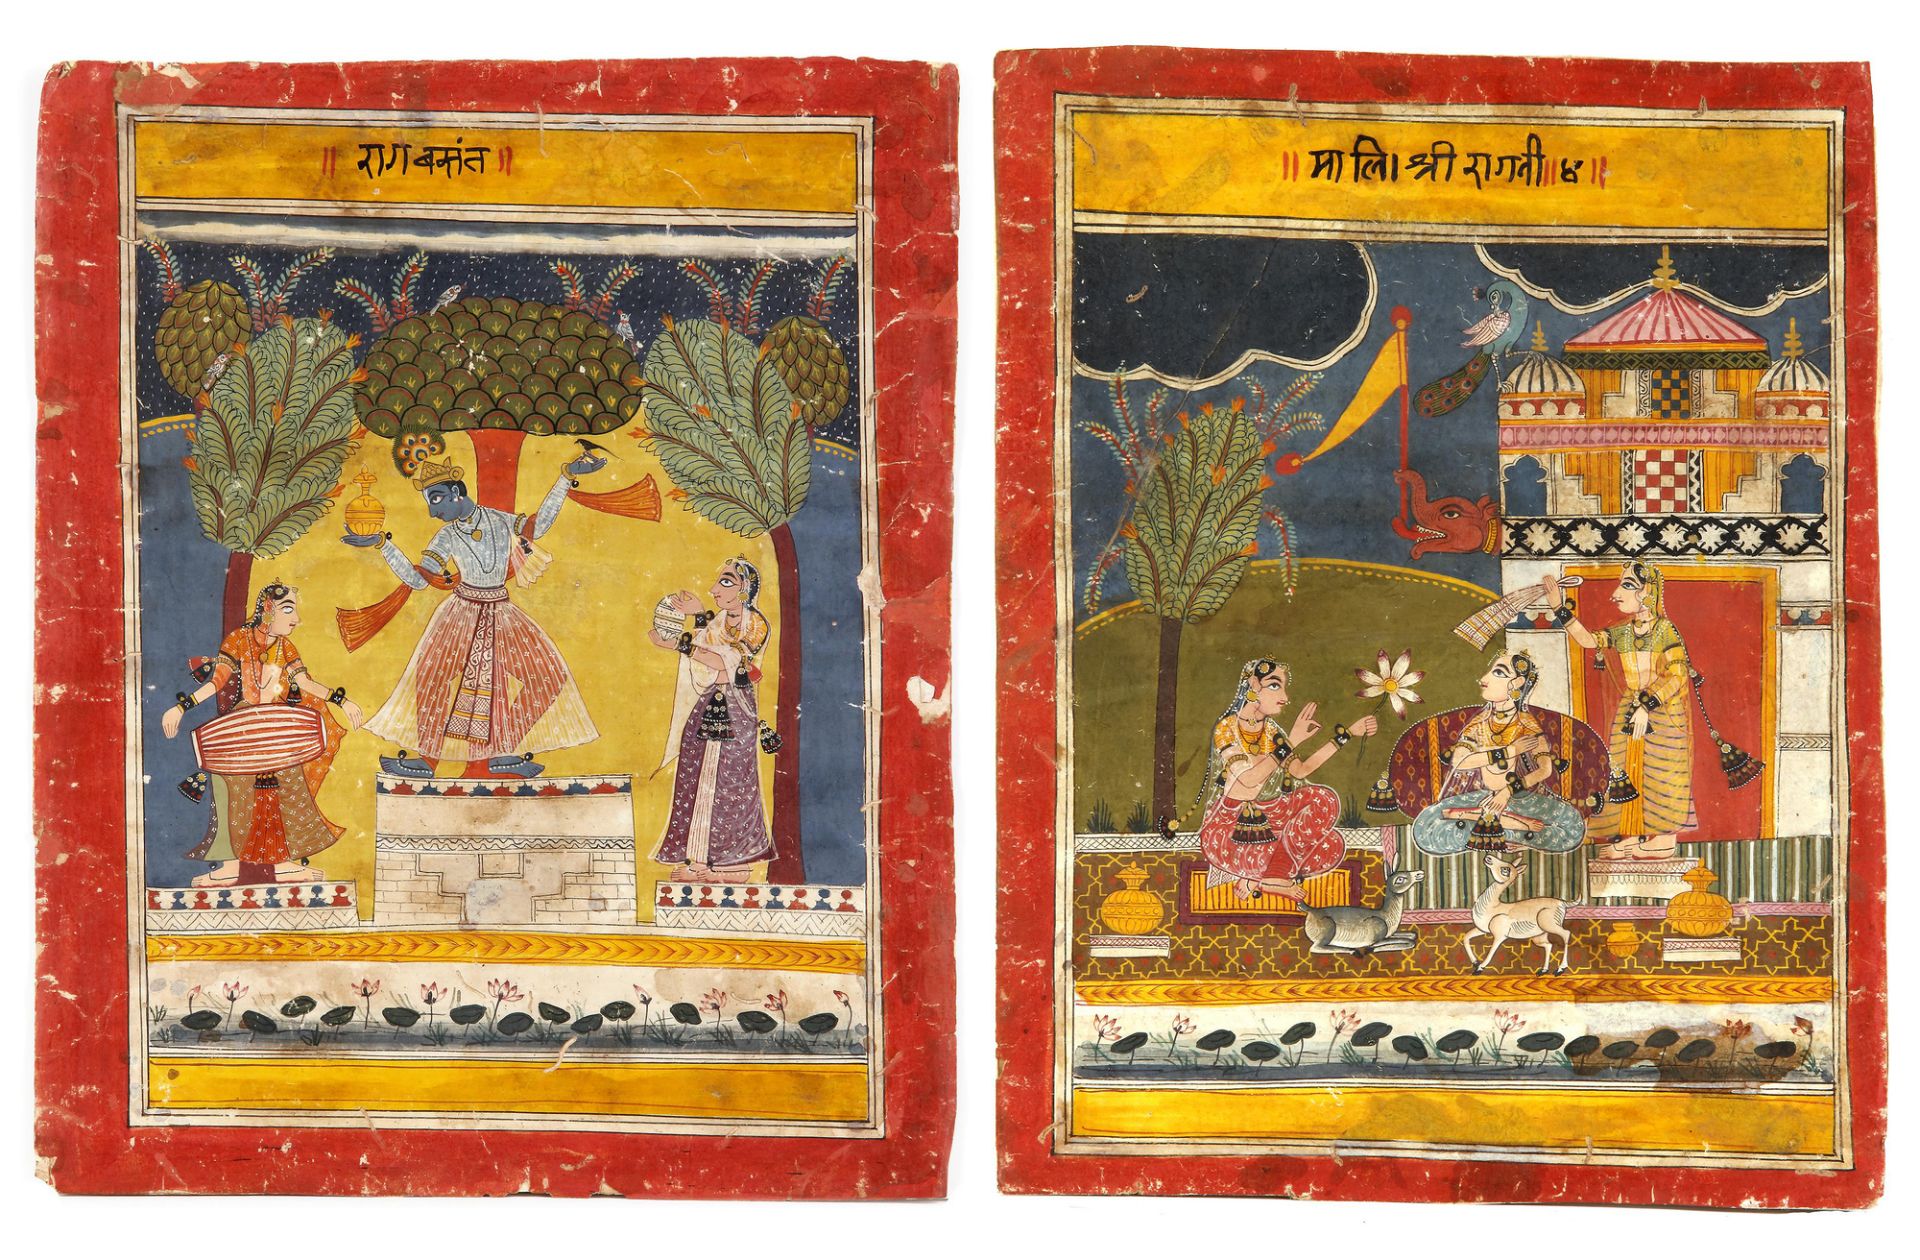 THREE IIIUSTRATIONS FROM A RAGAMALA SERIES, CENTRAL INDIA, MALWA, 17TH CENTURY - Image 2 of 5